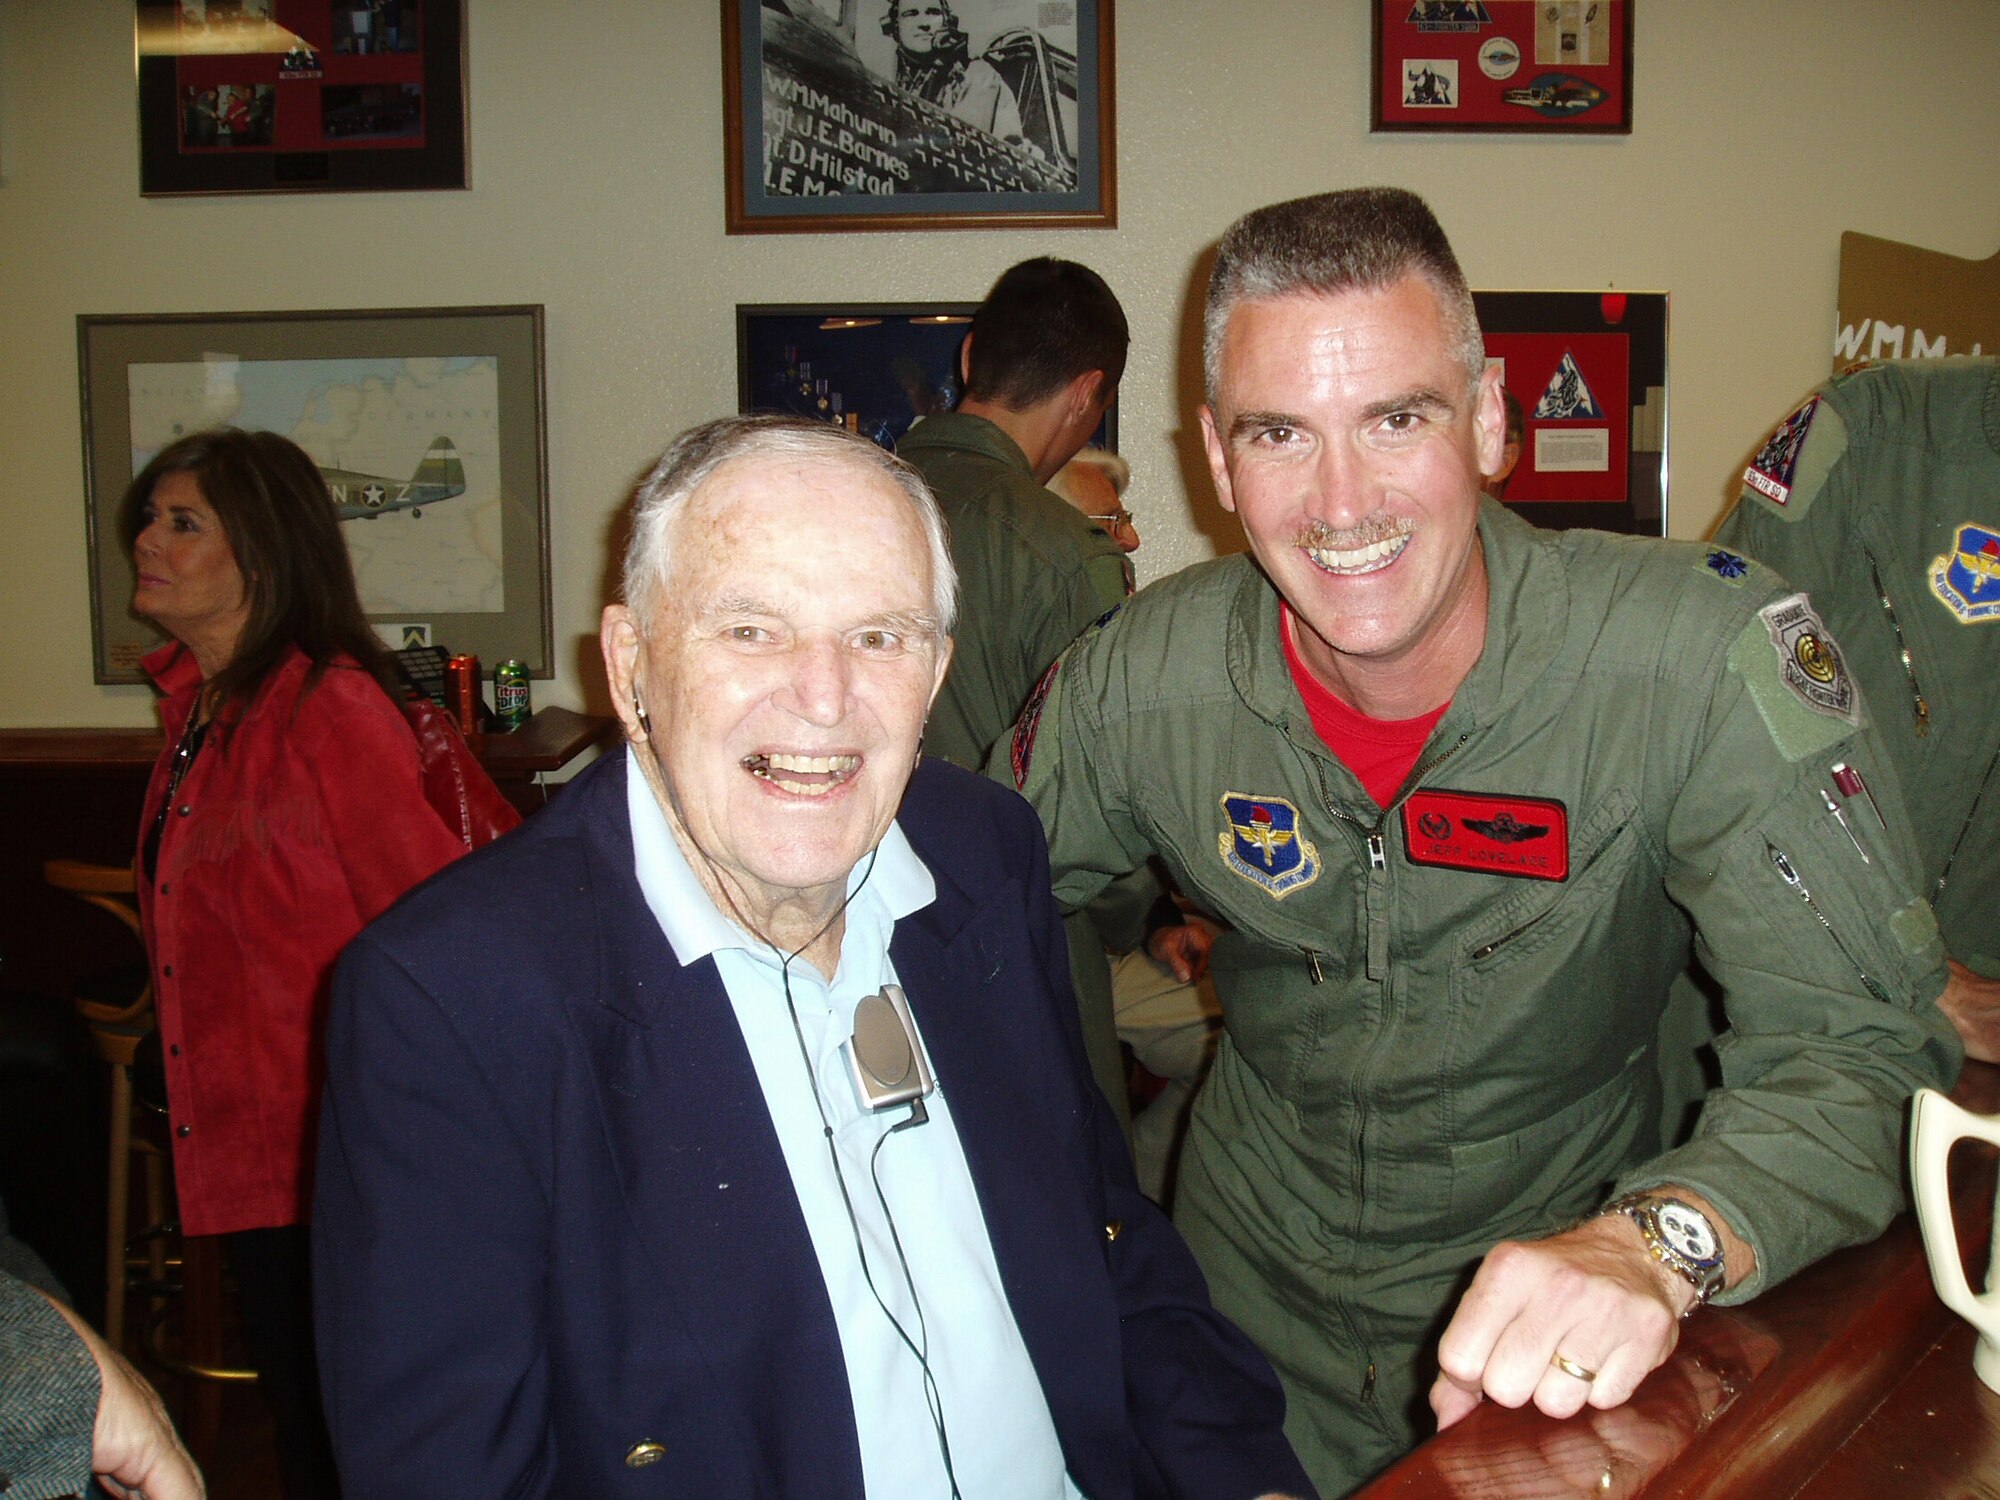 Col. Walker "Bud" Mahurin (ret.) and Lt. Col. Jeffery Lovelace, former 63rd Fighter Squadron commander, pose for a photo during a squadron function at Luke Air Force Base in March 2007.  Colonel Mahurin was part of the 63rd FS during World War II.   (Courtesy Photo)